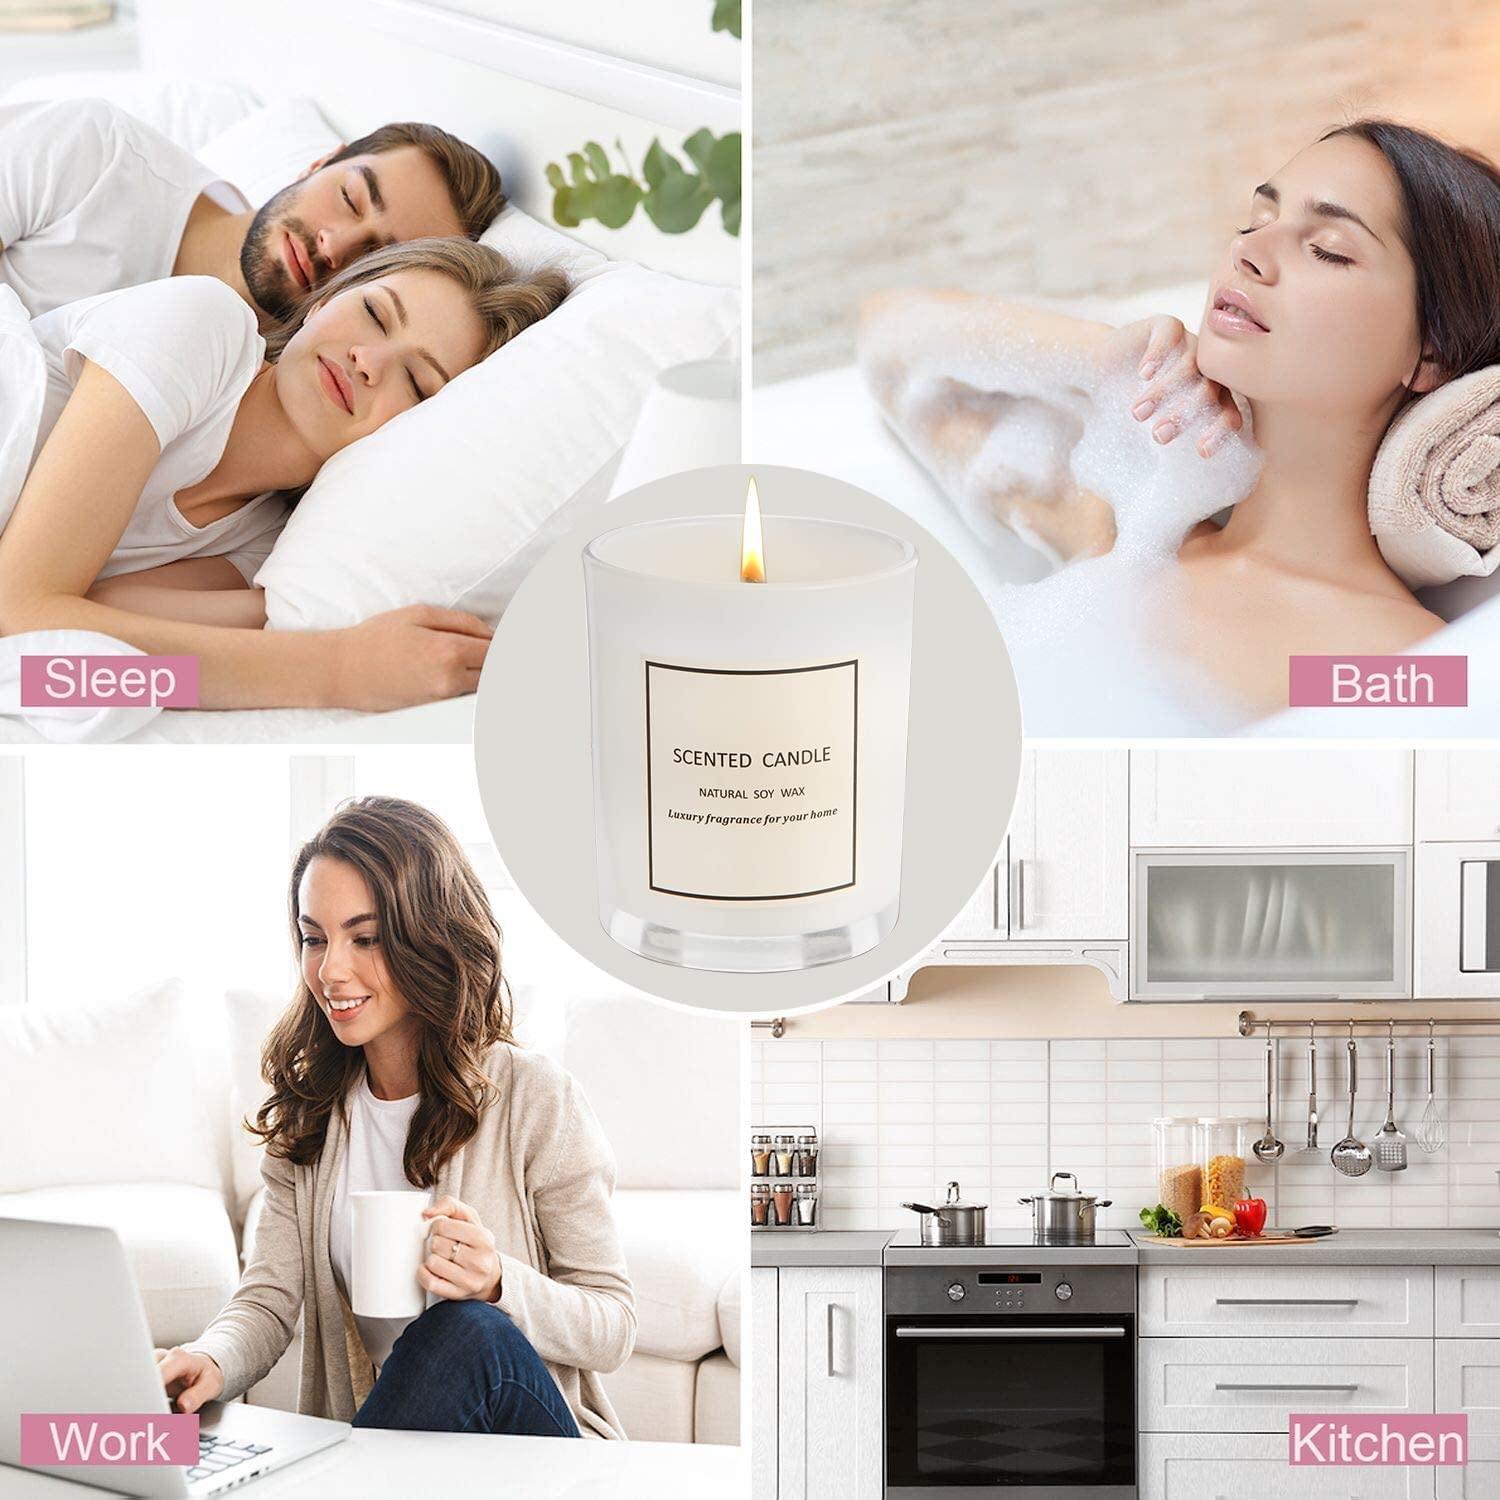 Gifts for Women&Men - Gifts Under 10 Dollars, Candles for Home